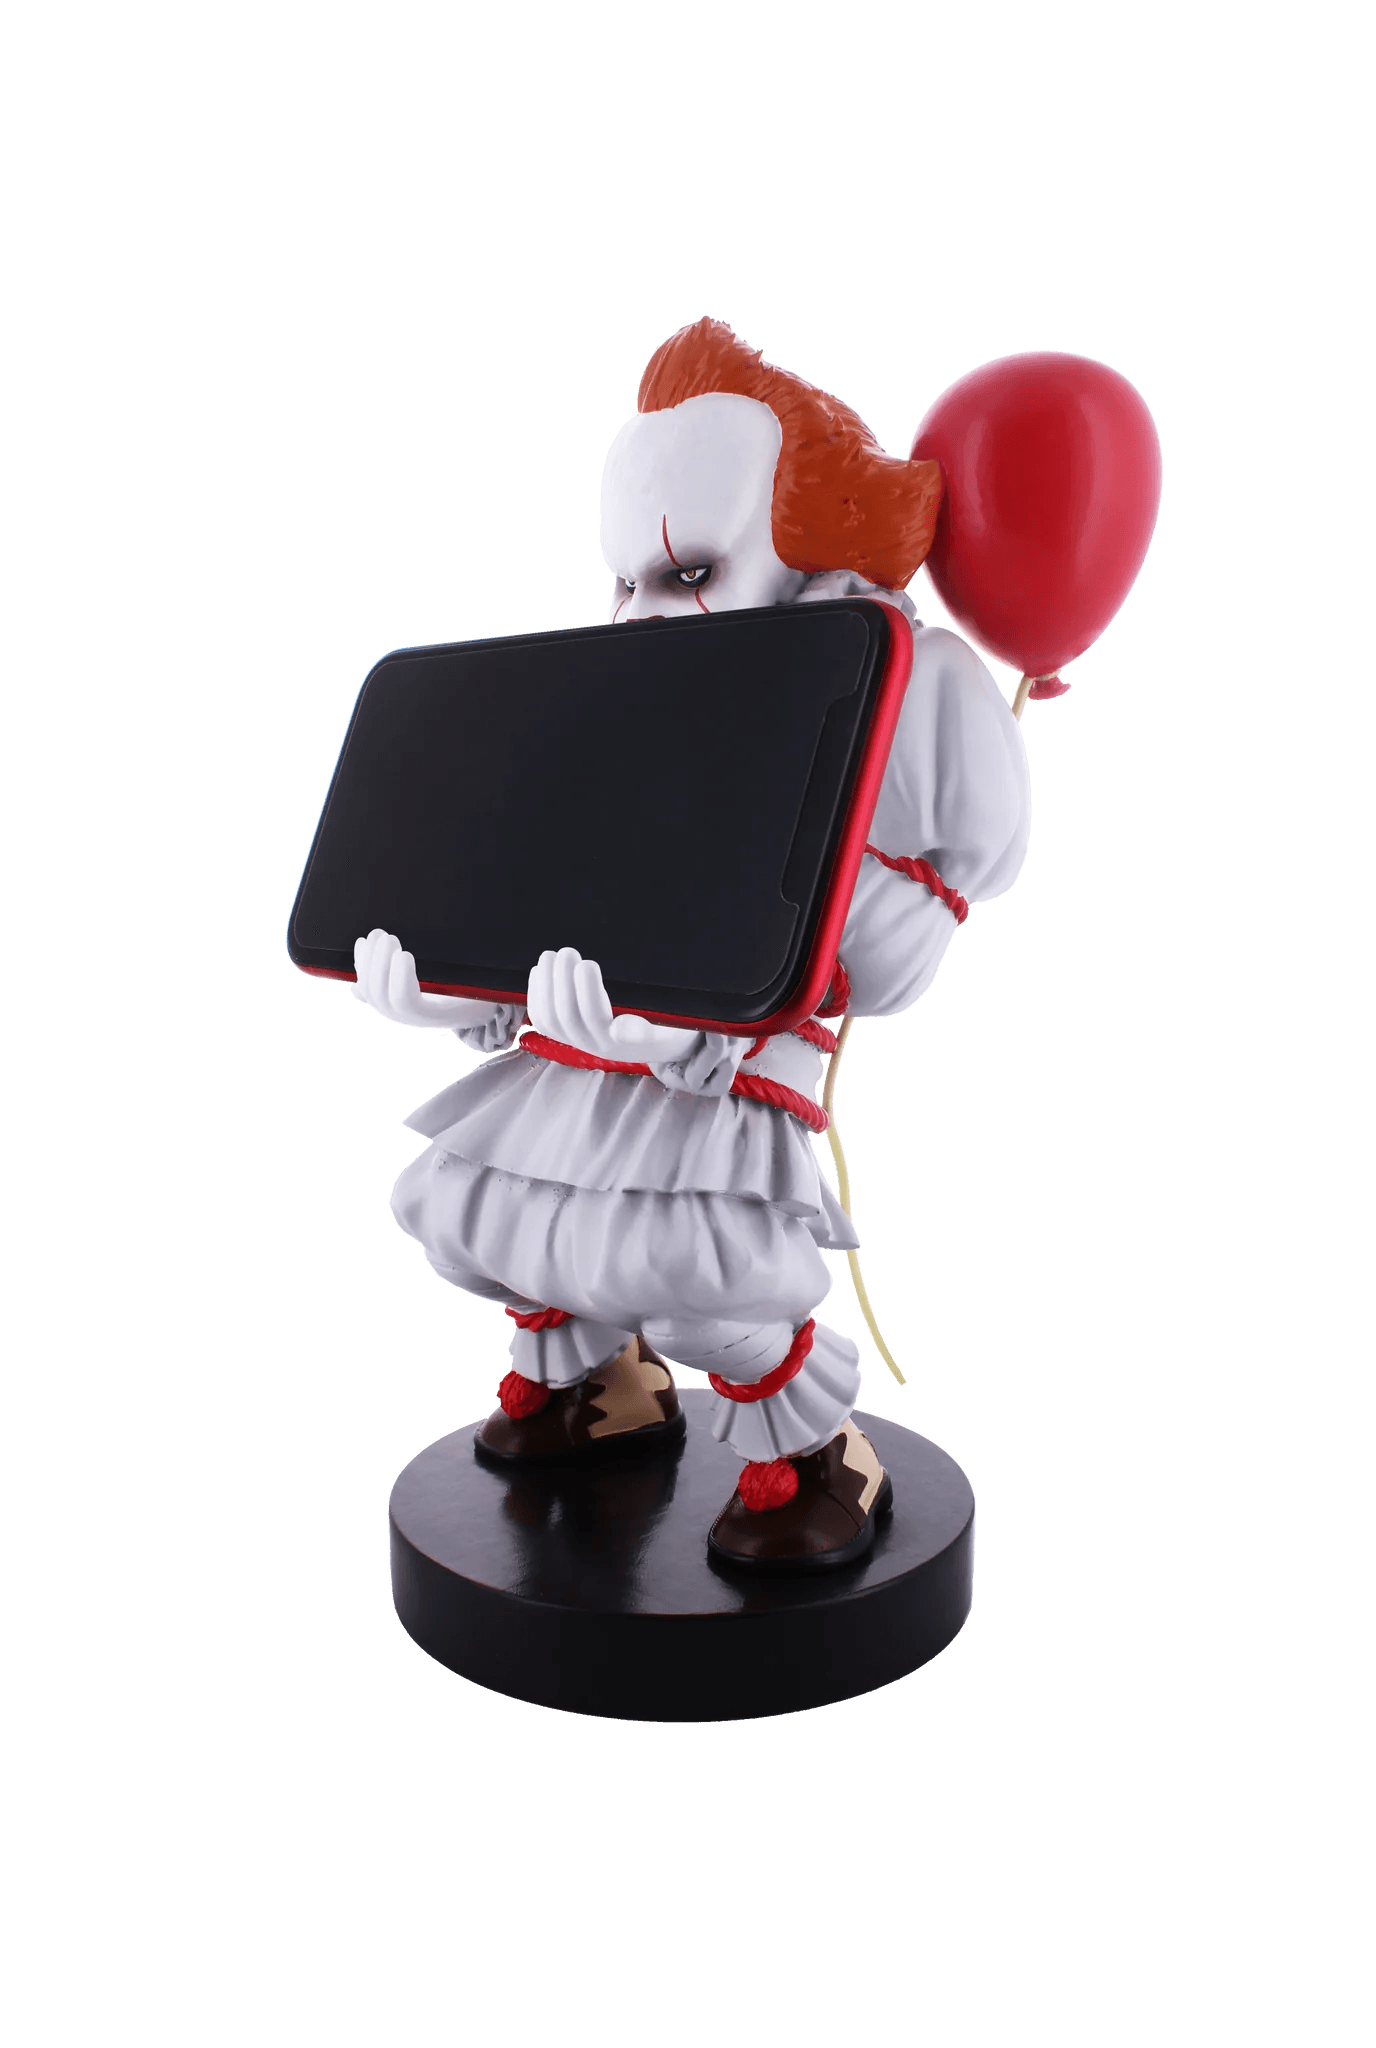 Cable Guys - IT - Pennywise - Phone & Controller Holder - The Card Vault